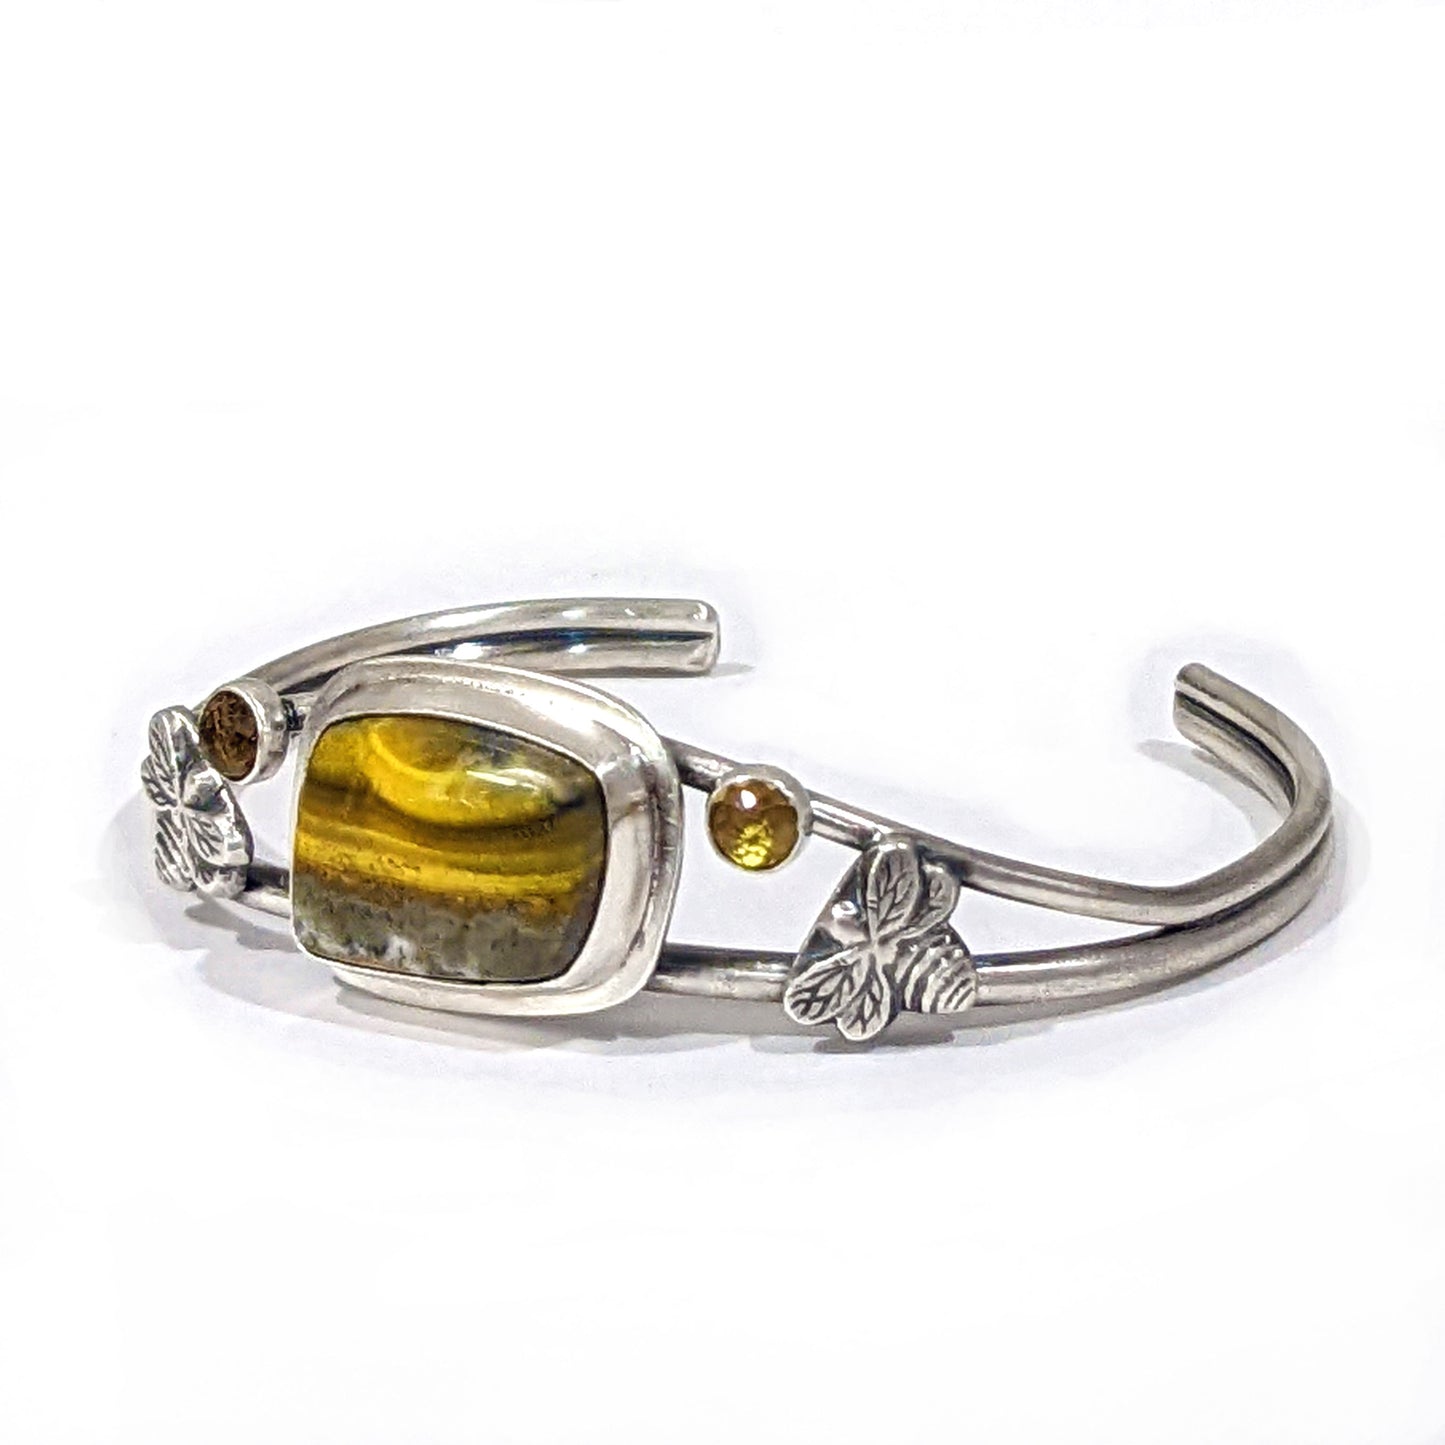 Side view of Sterling Silver Bumblebee Jasper cuff bracelet with two sterling silver bees and two rose cut citrine gemstones